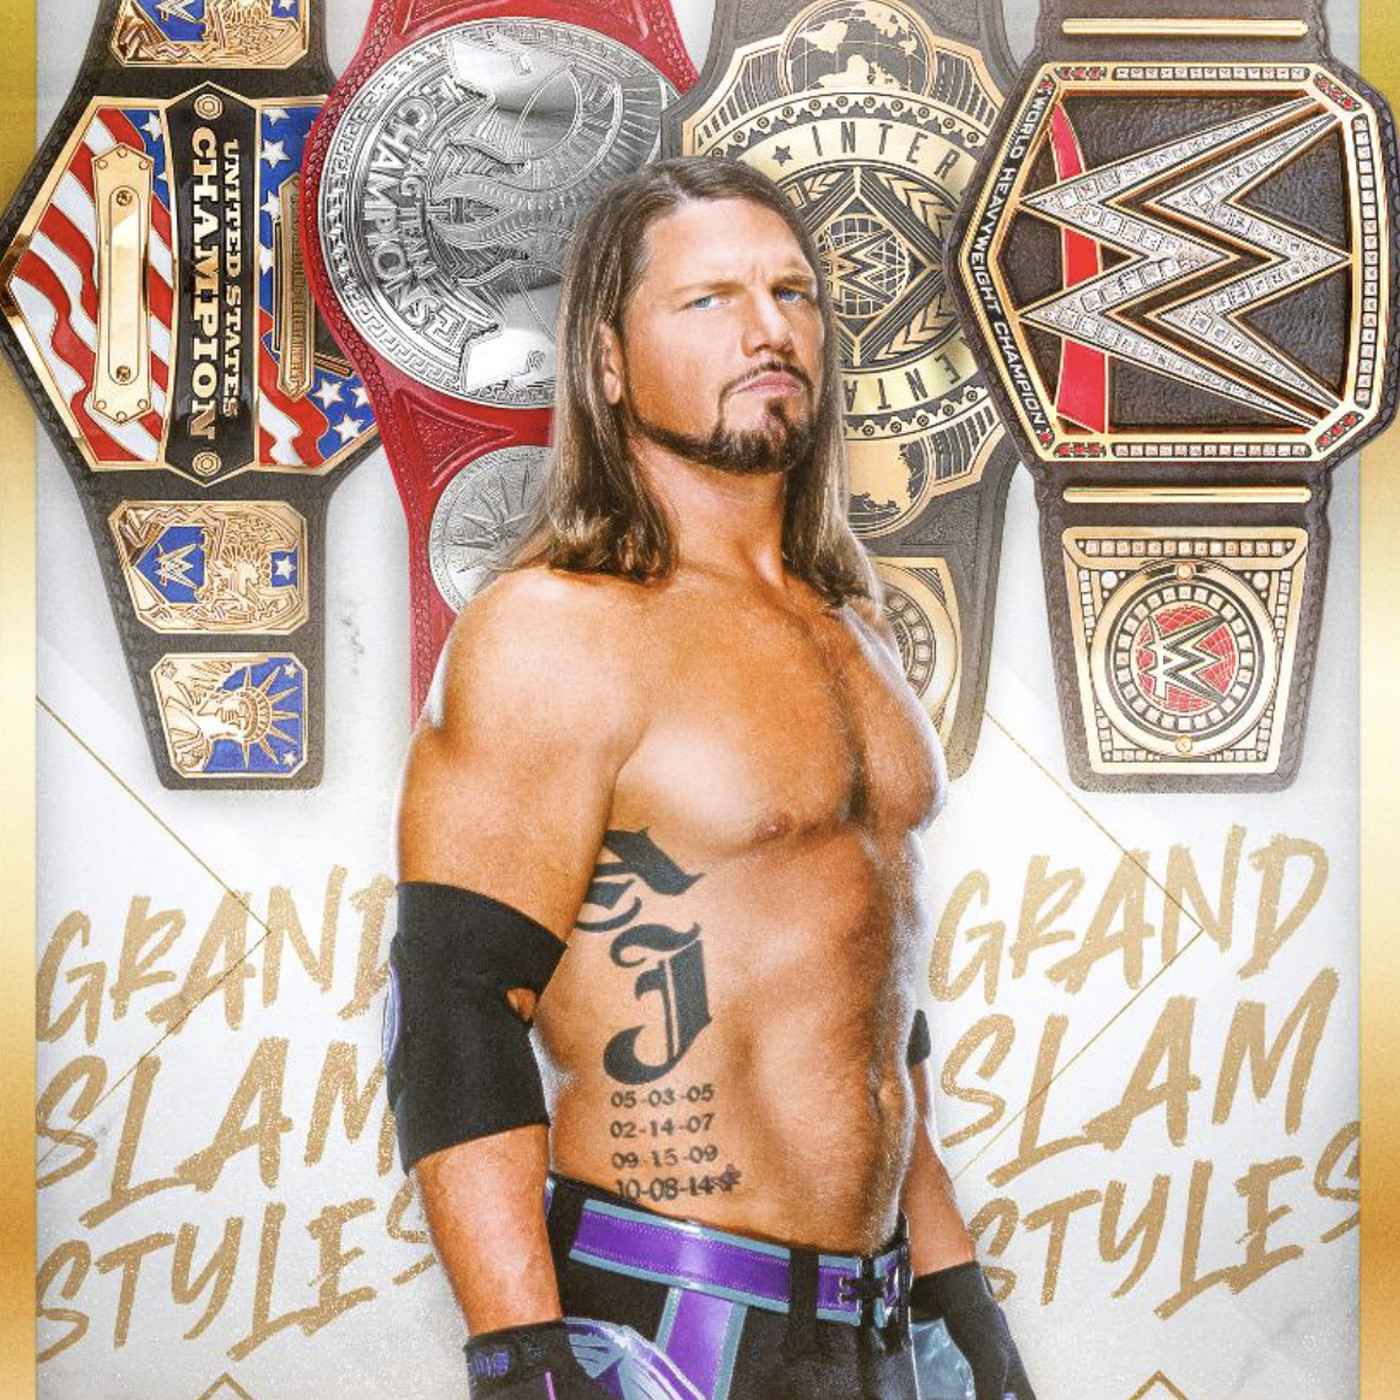 AJ Styles is now a Grand Slam Champion in WWE